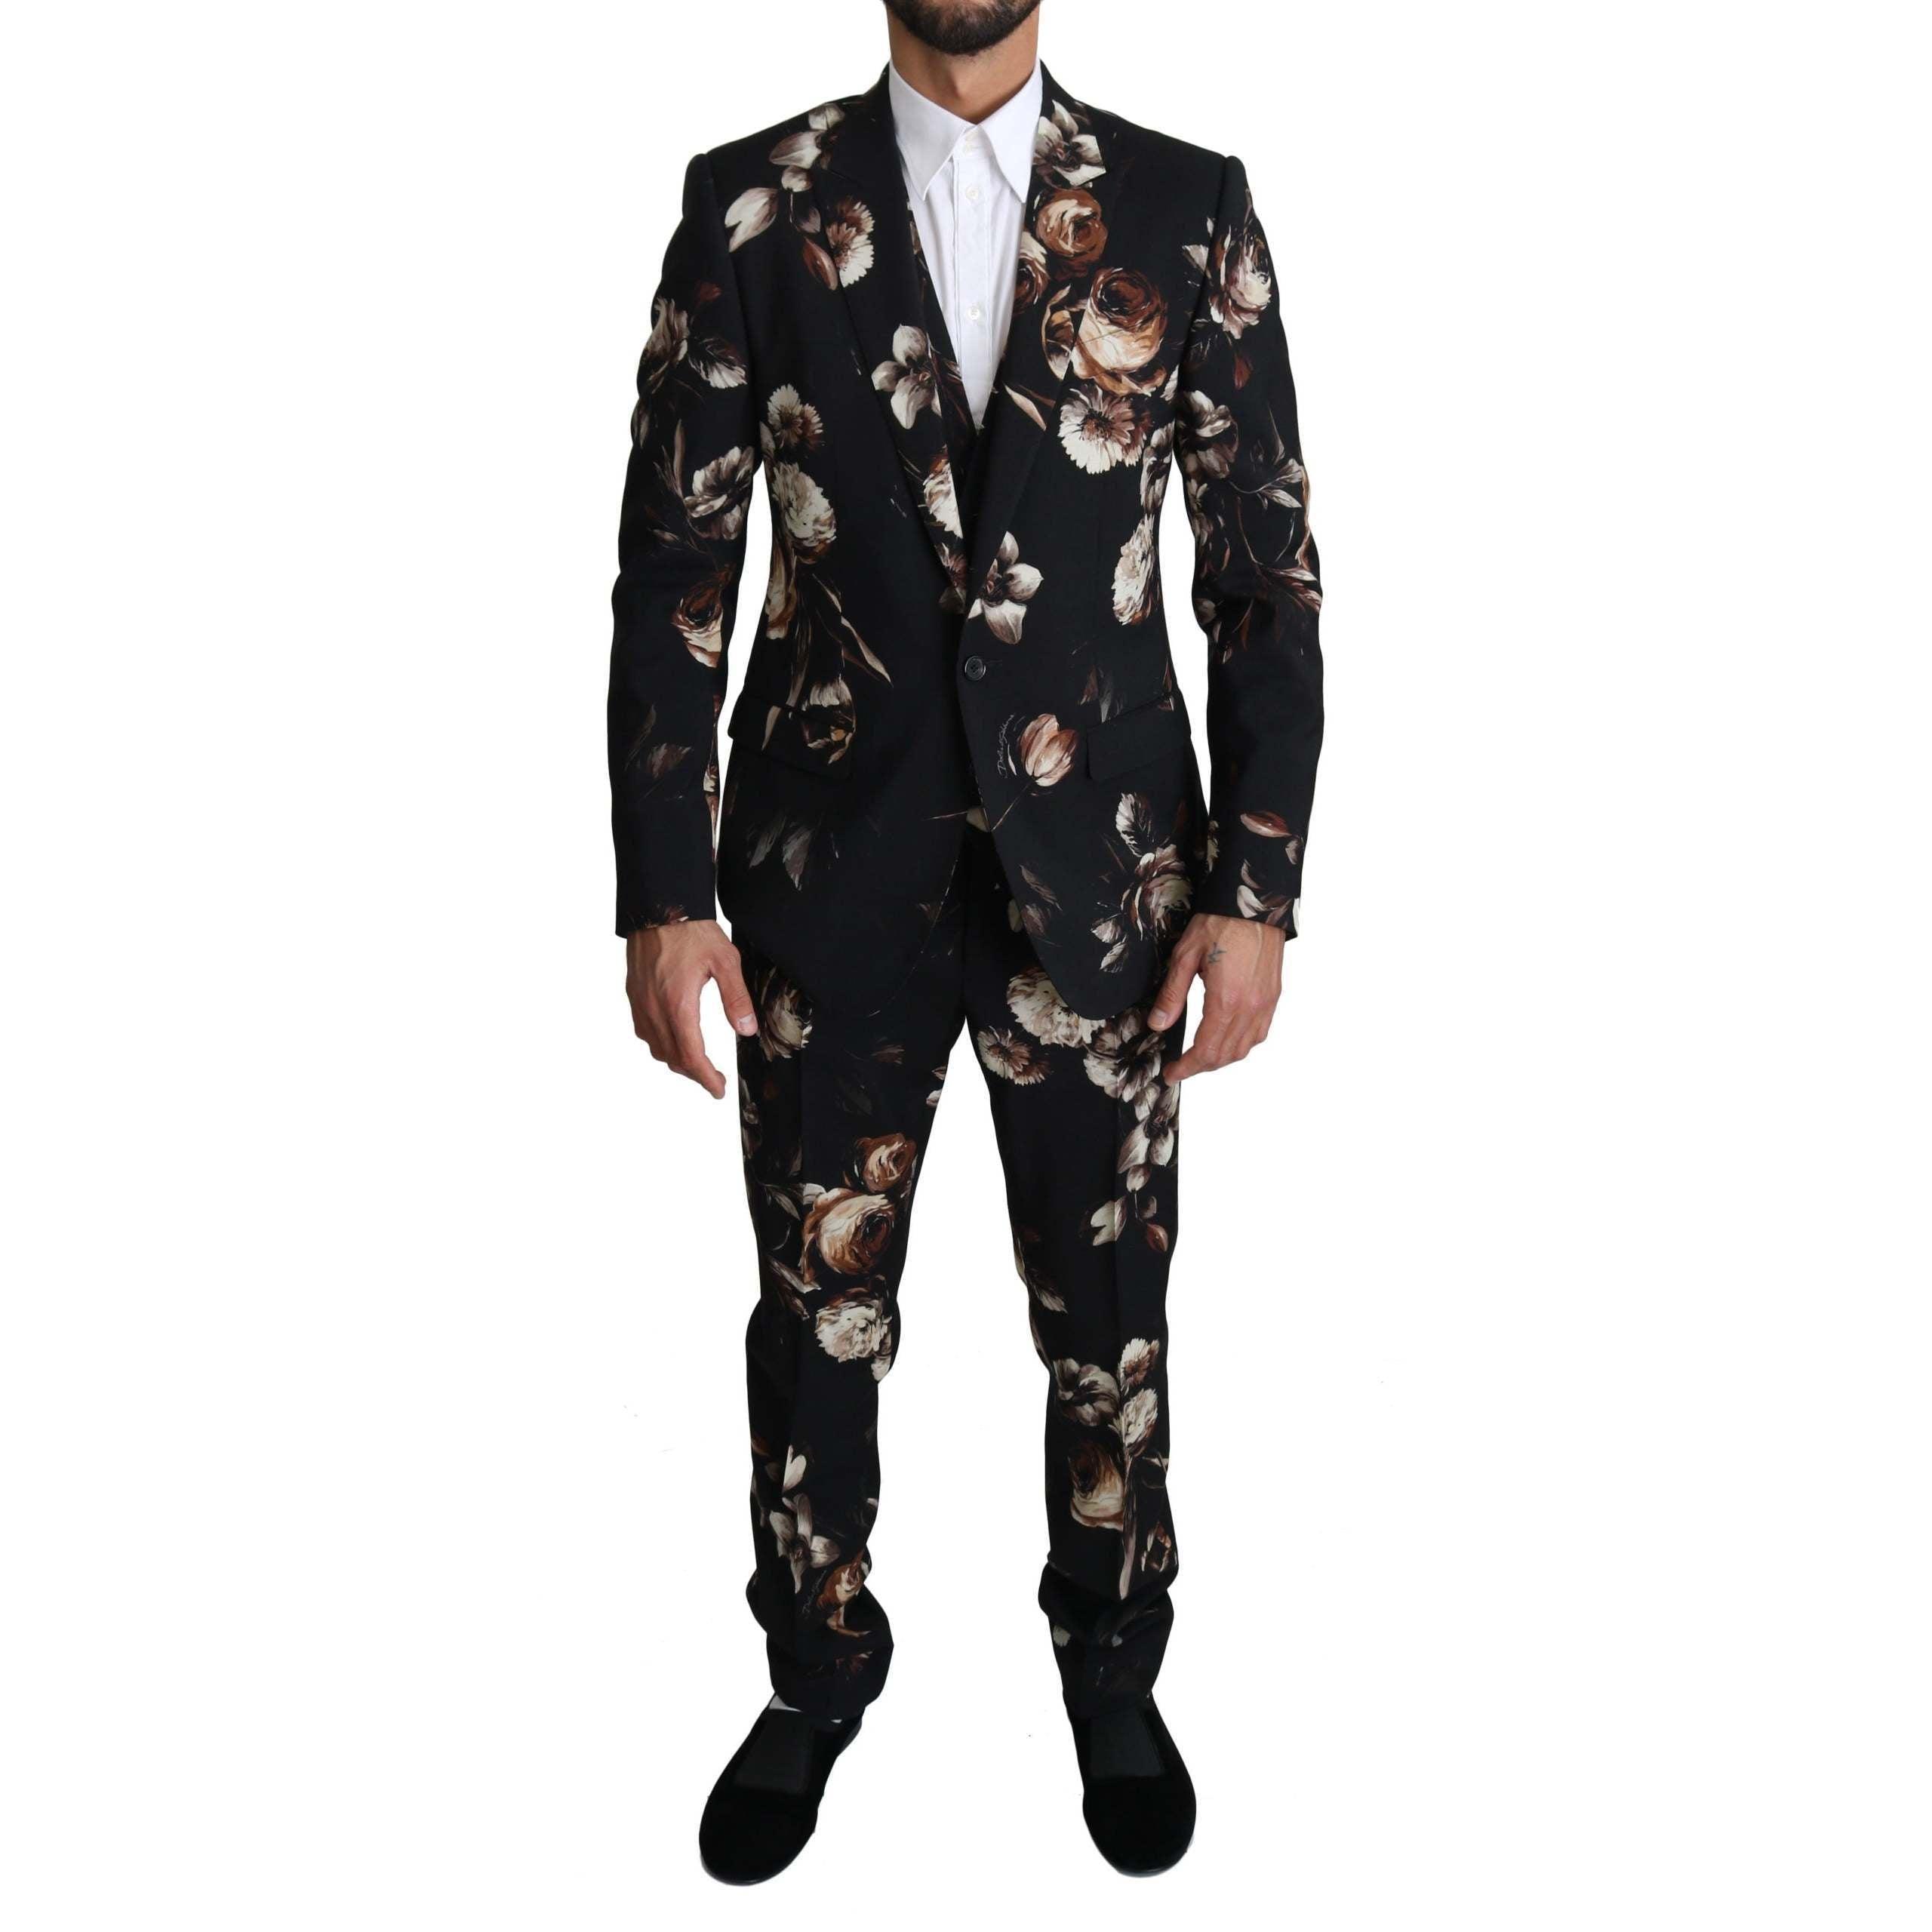 Save 23% Dolce & Gabbana Black Wool One Button Slim Martini Suit for Men Mens Clothing Suits 